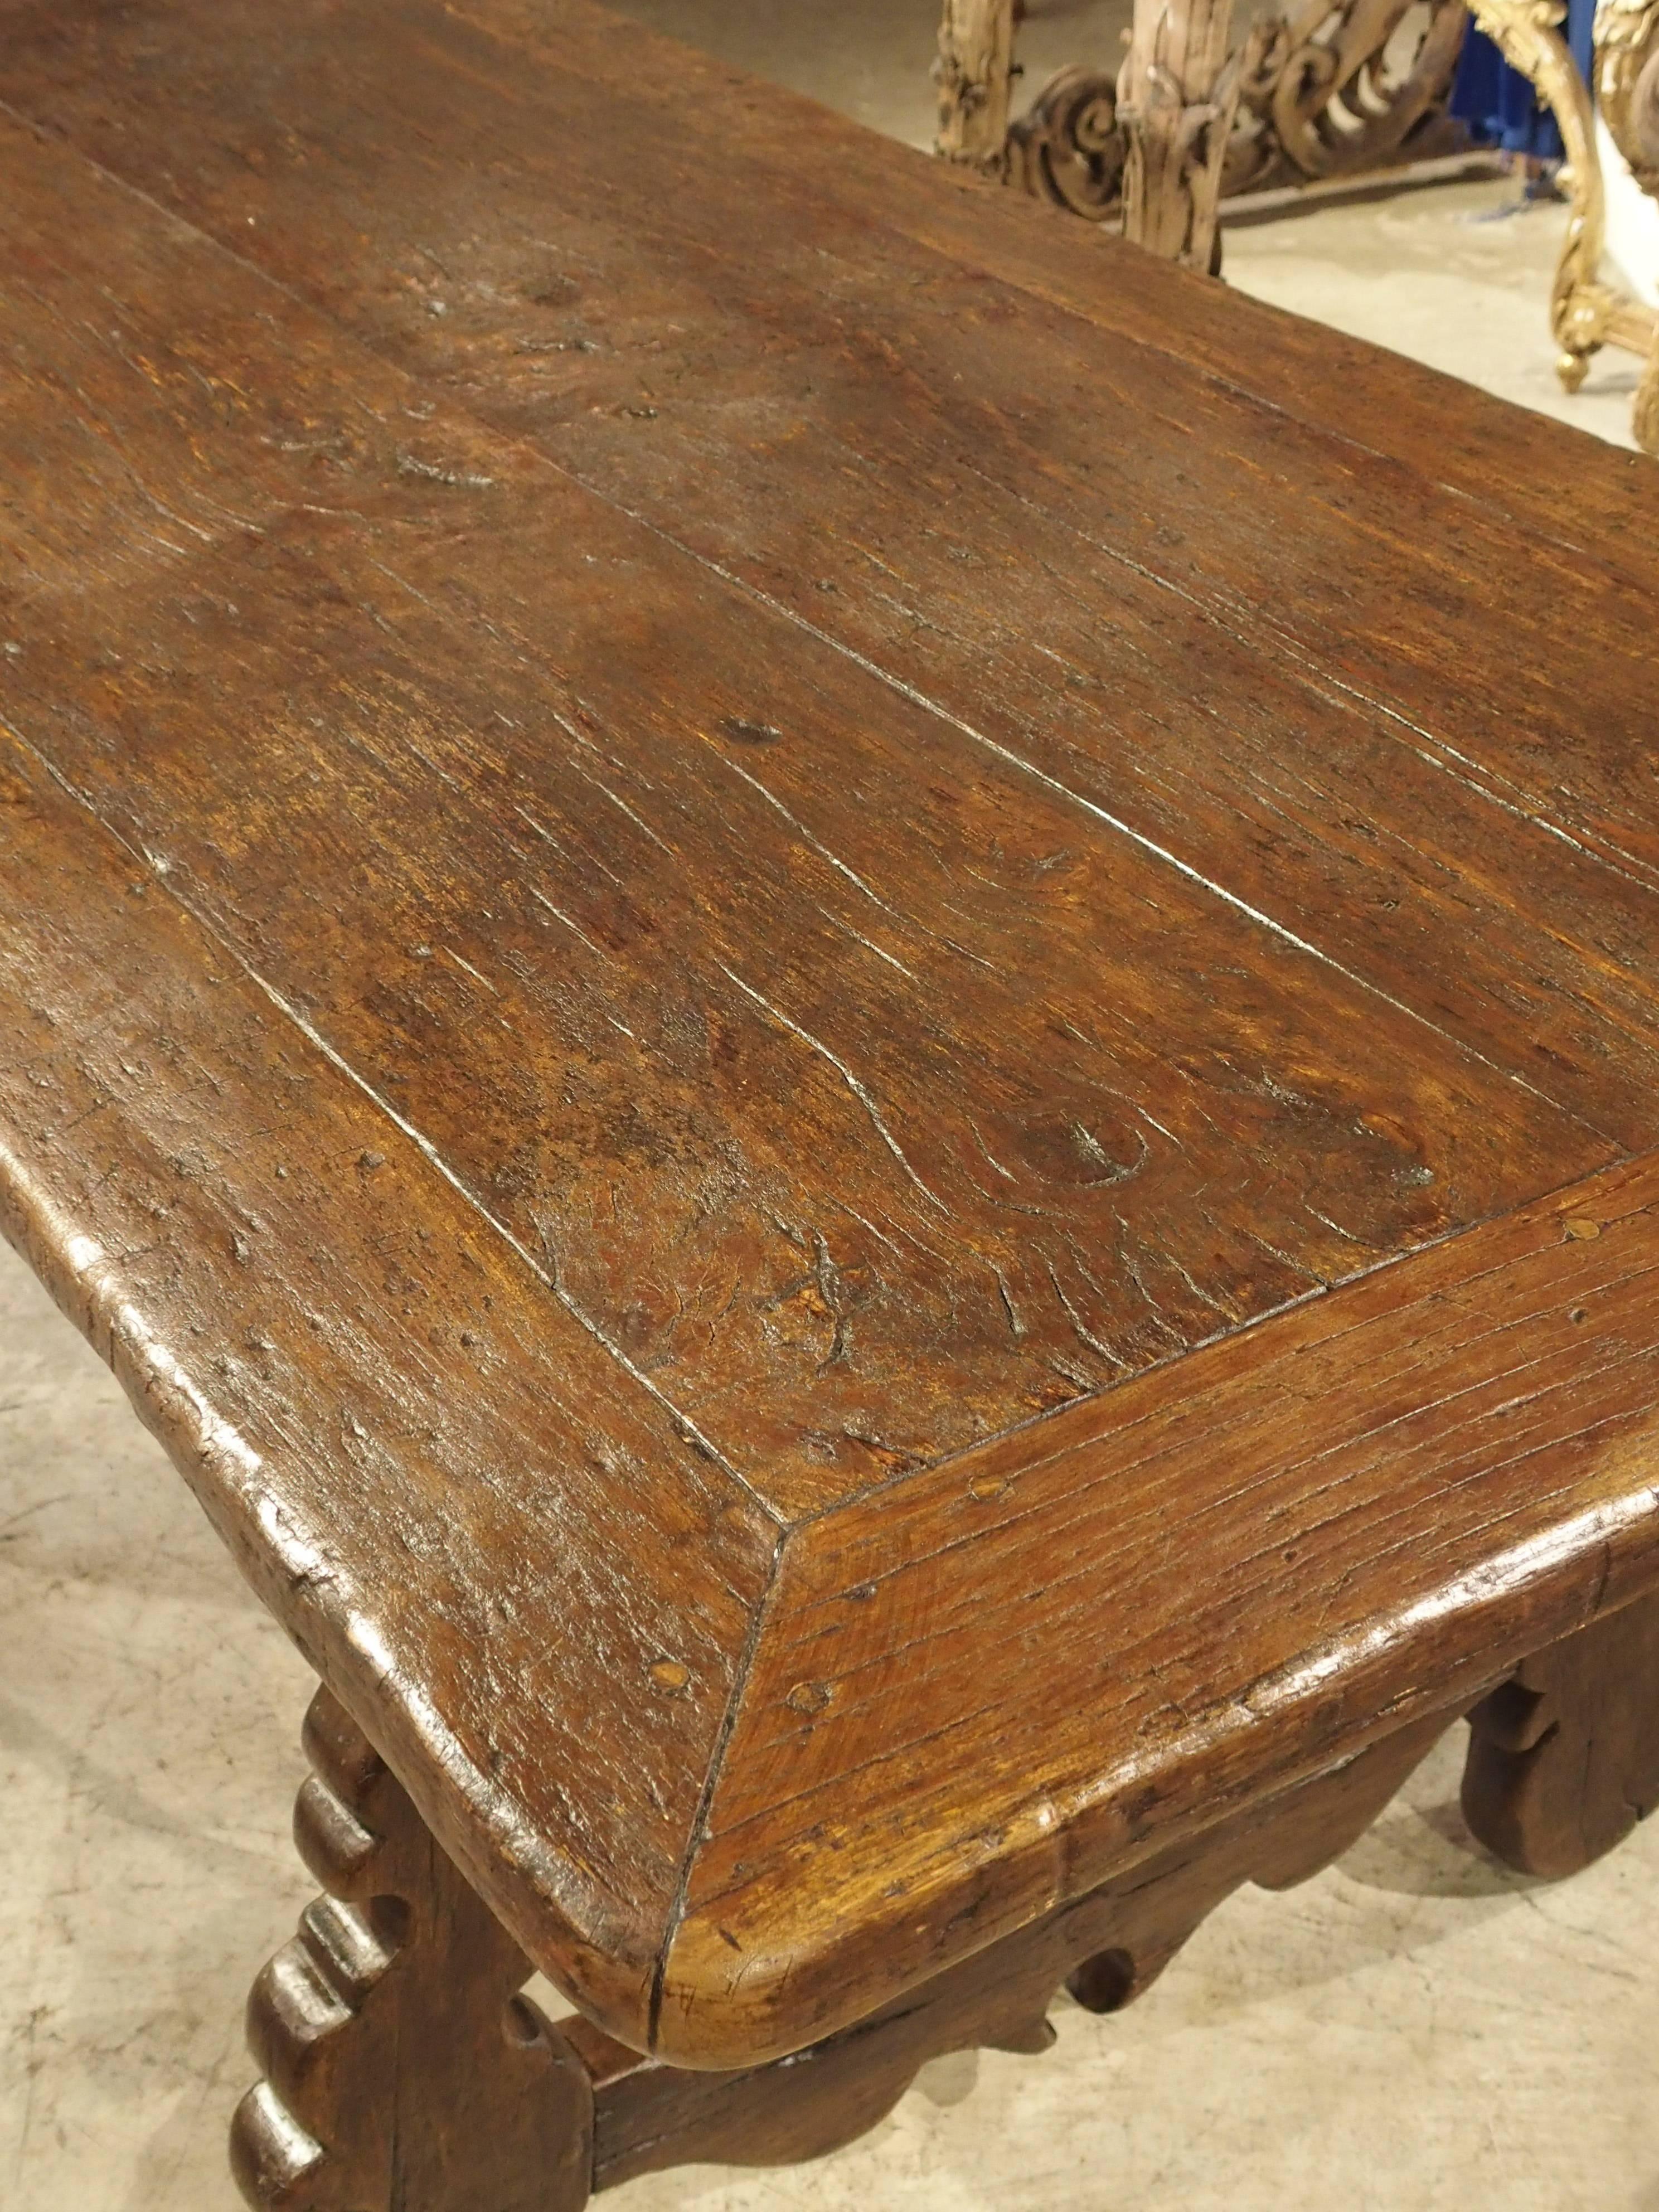 This long antique table from Spain was made in the 1700s. The raised grain of the elmwood on the tabletop is absolutely wonderful and gives it a very distinct look. It is a very functional table because of this. Placing pieces on the table will not